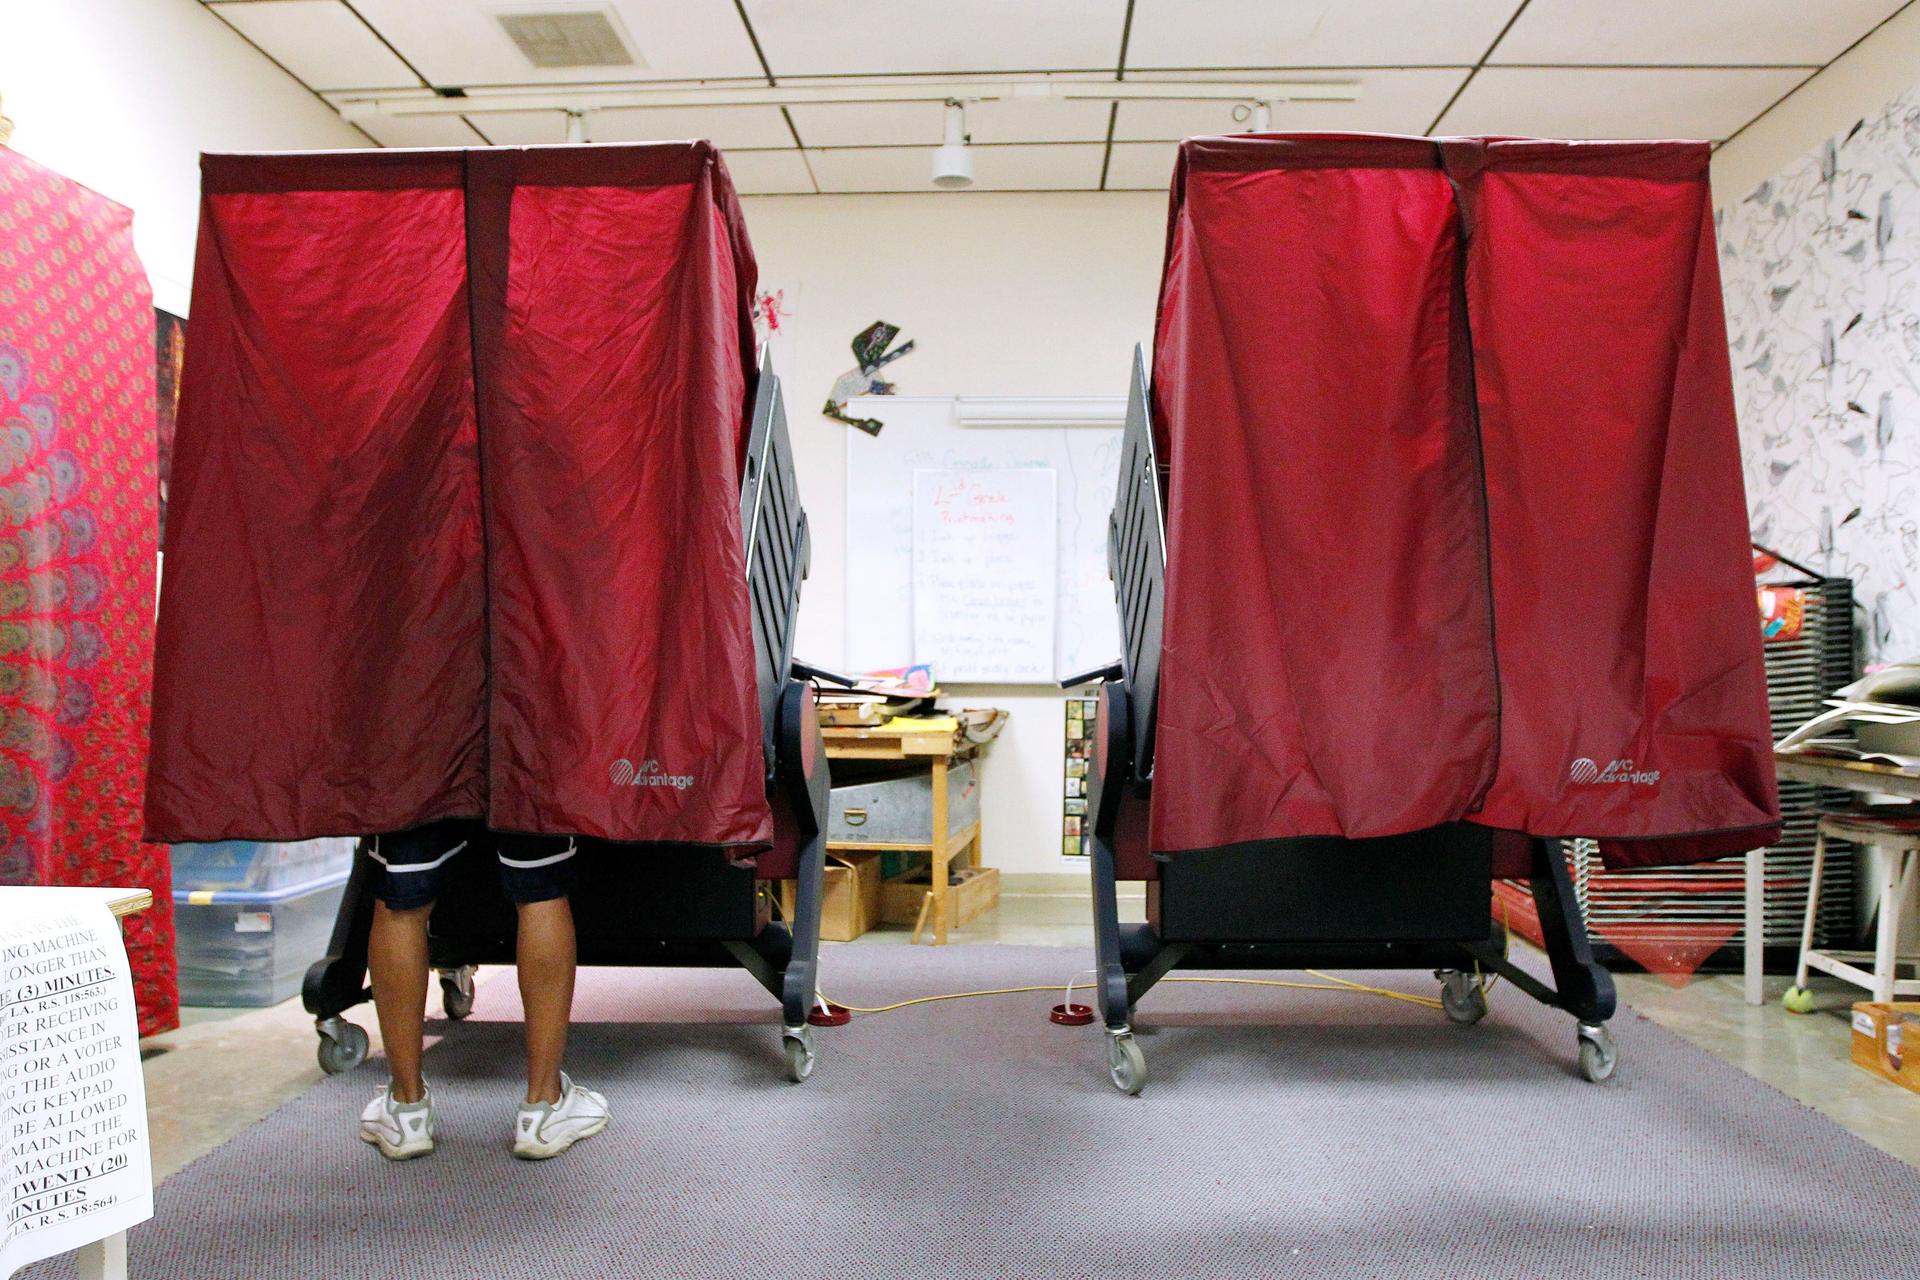 Two voting booths, red curtains drawn